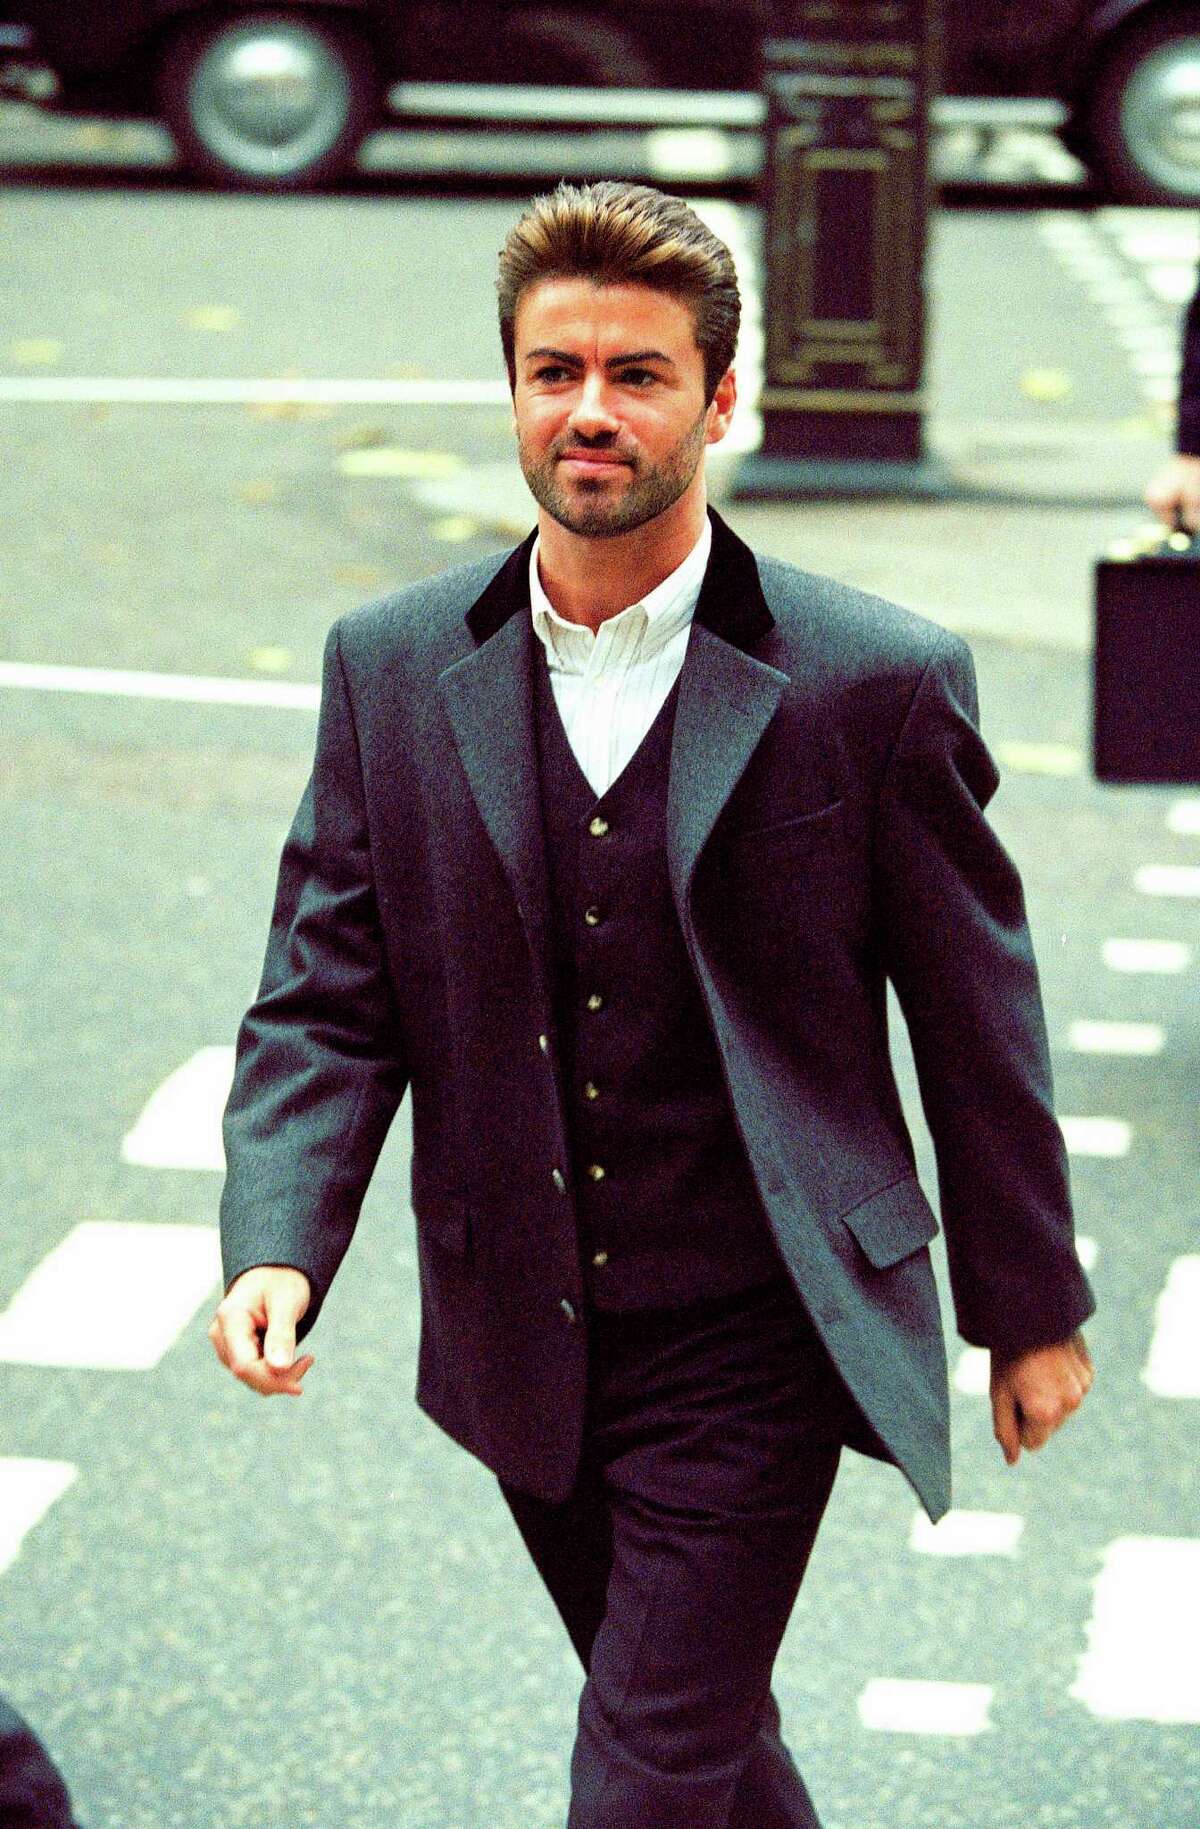 FILE - In this Oct. 28, 1993, file photo, pop star George Michael arrives to give evidence at the Royal Courts of Justice in London. Michael was petitioning the court to release him from his contract with Sony Music Entertainment (UK) Ltd. Michael, who rocketed to stardom with WHAM! and went on to enjoy a long and celebrated solo career lined with controversies, has died, his publicist said Sunday, Dec. 25, 2016. He was 53. (AP Photo/Alistair Grant) ORG XMIT: NYGM106